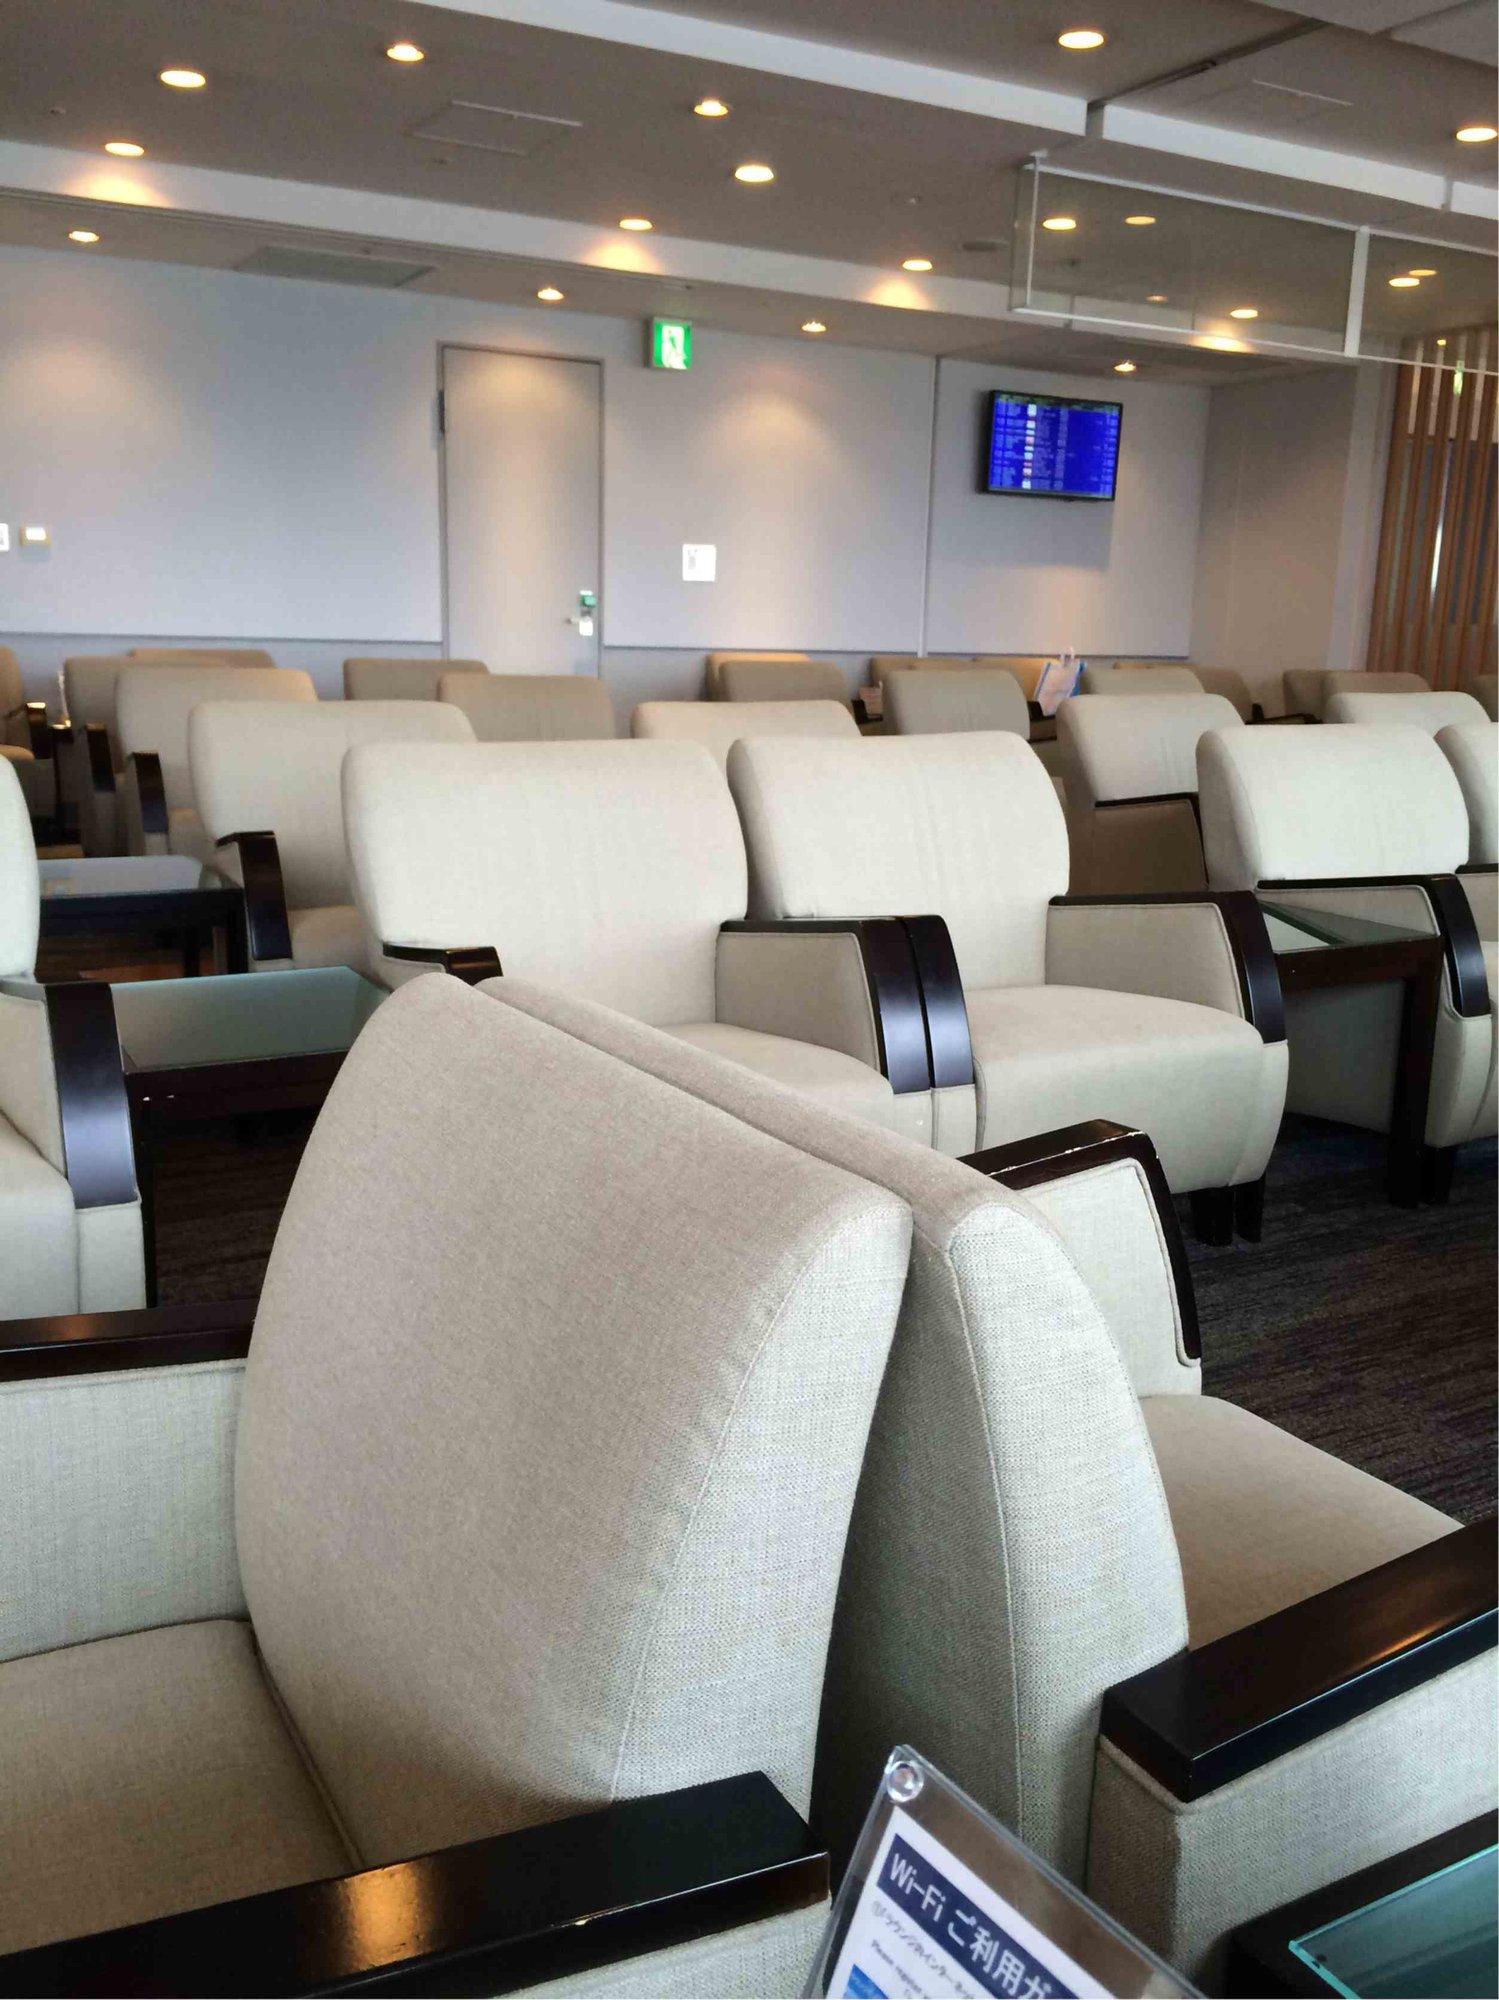 All Nippon Airways ANA Lounge image 4 of 7